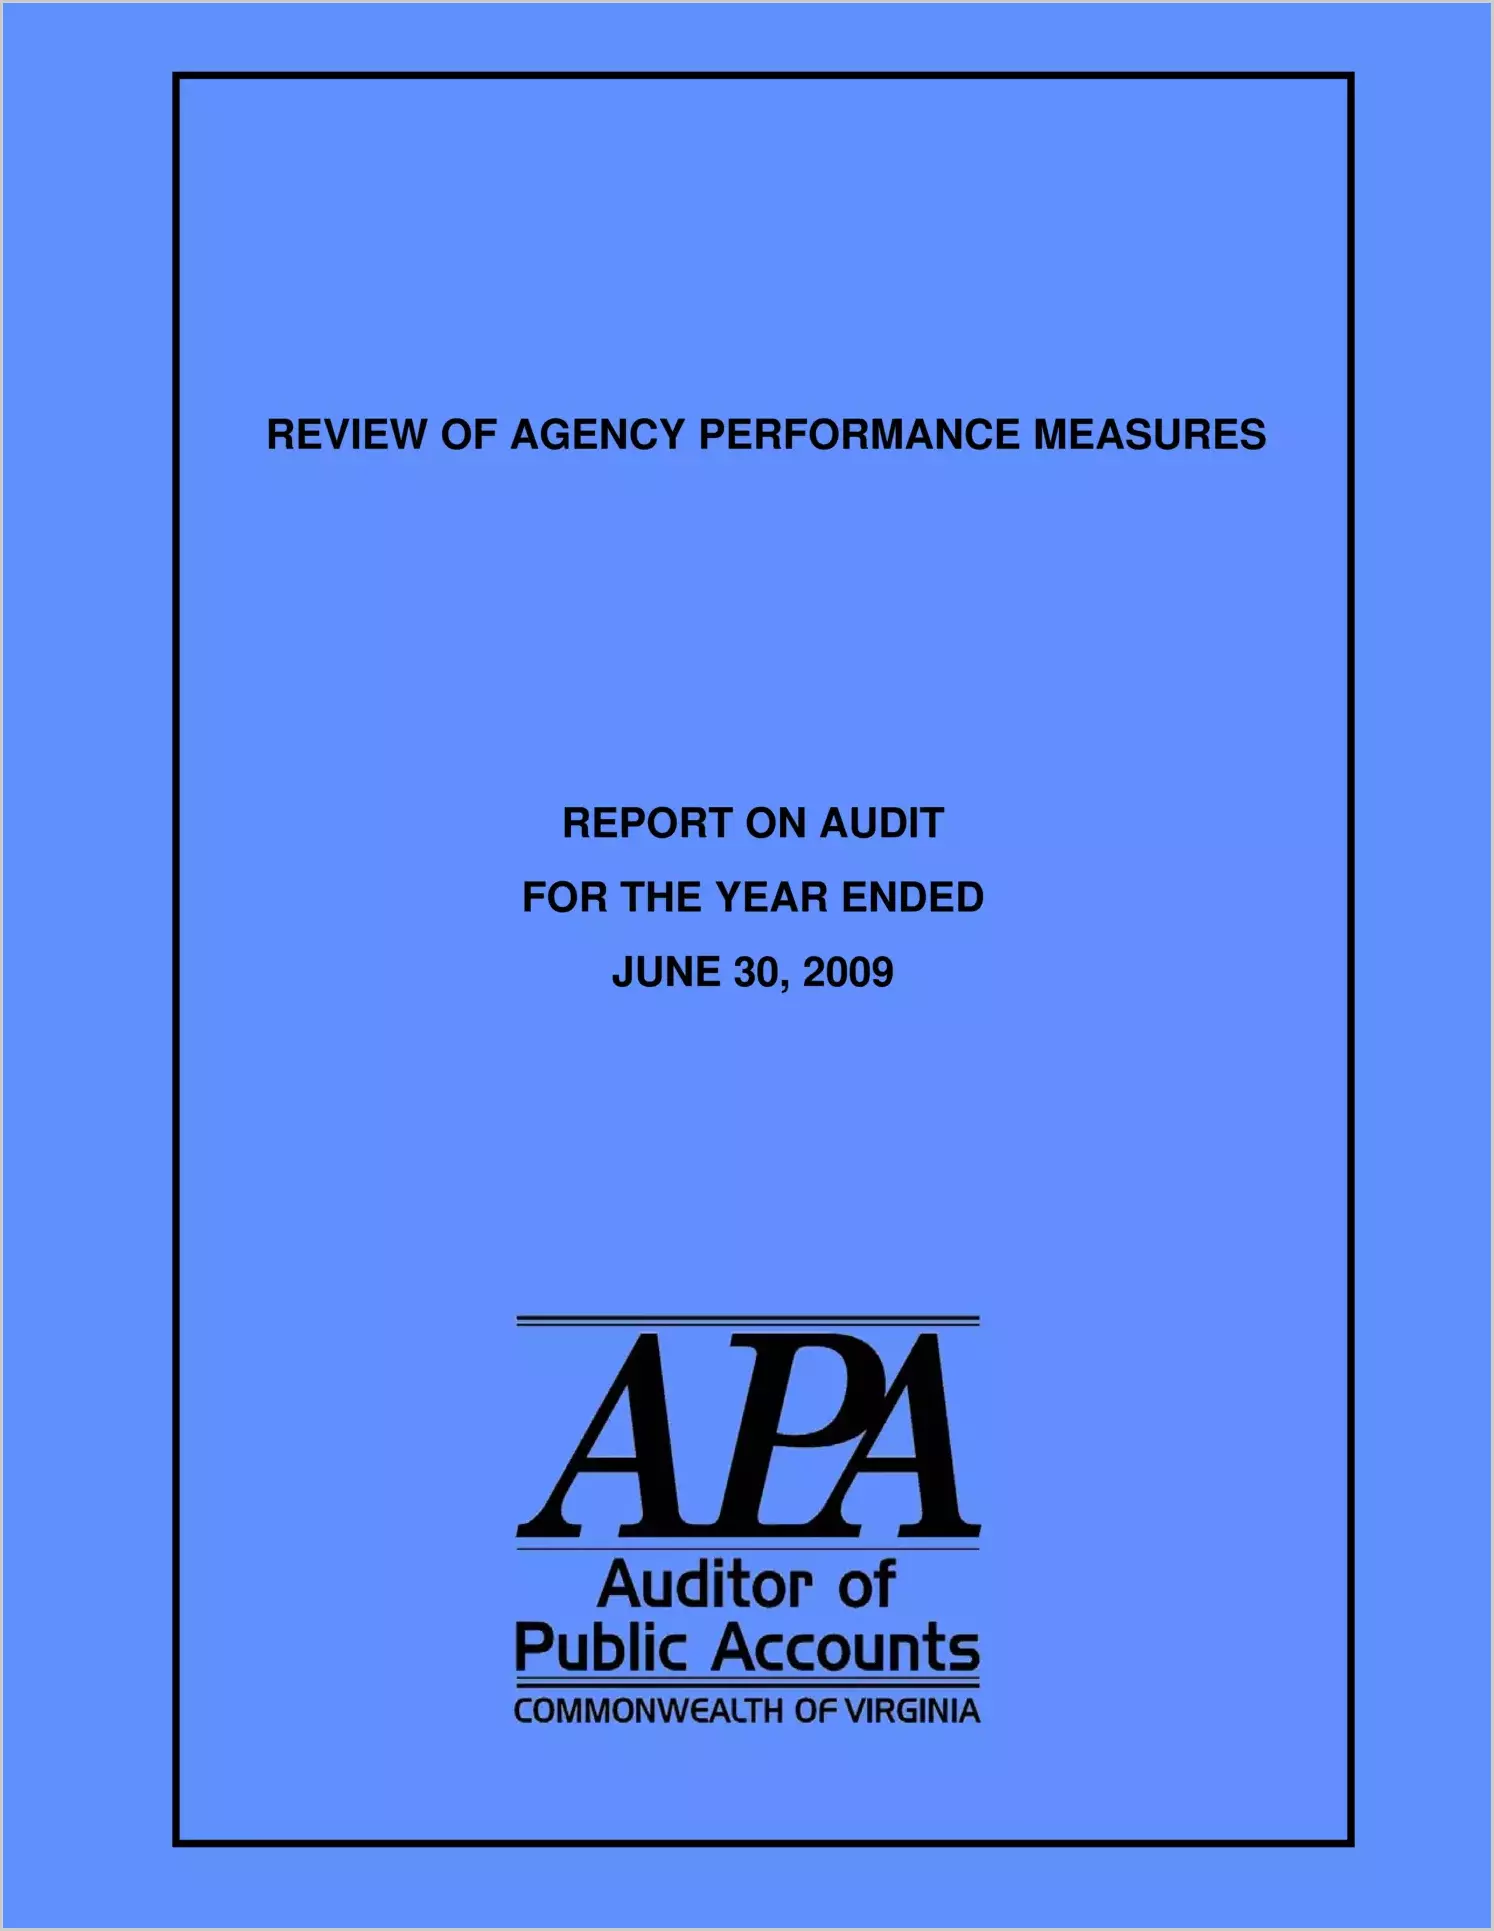 Review of Agency Performance Measures report on Audit for the year ended June 30, 2009